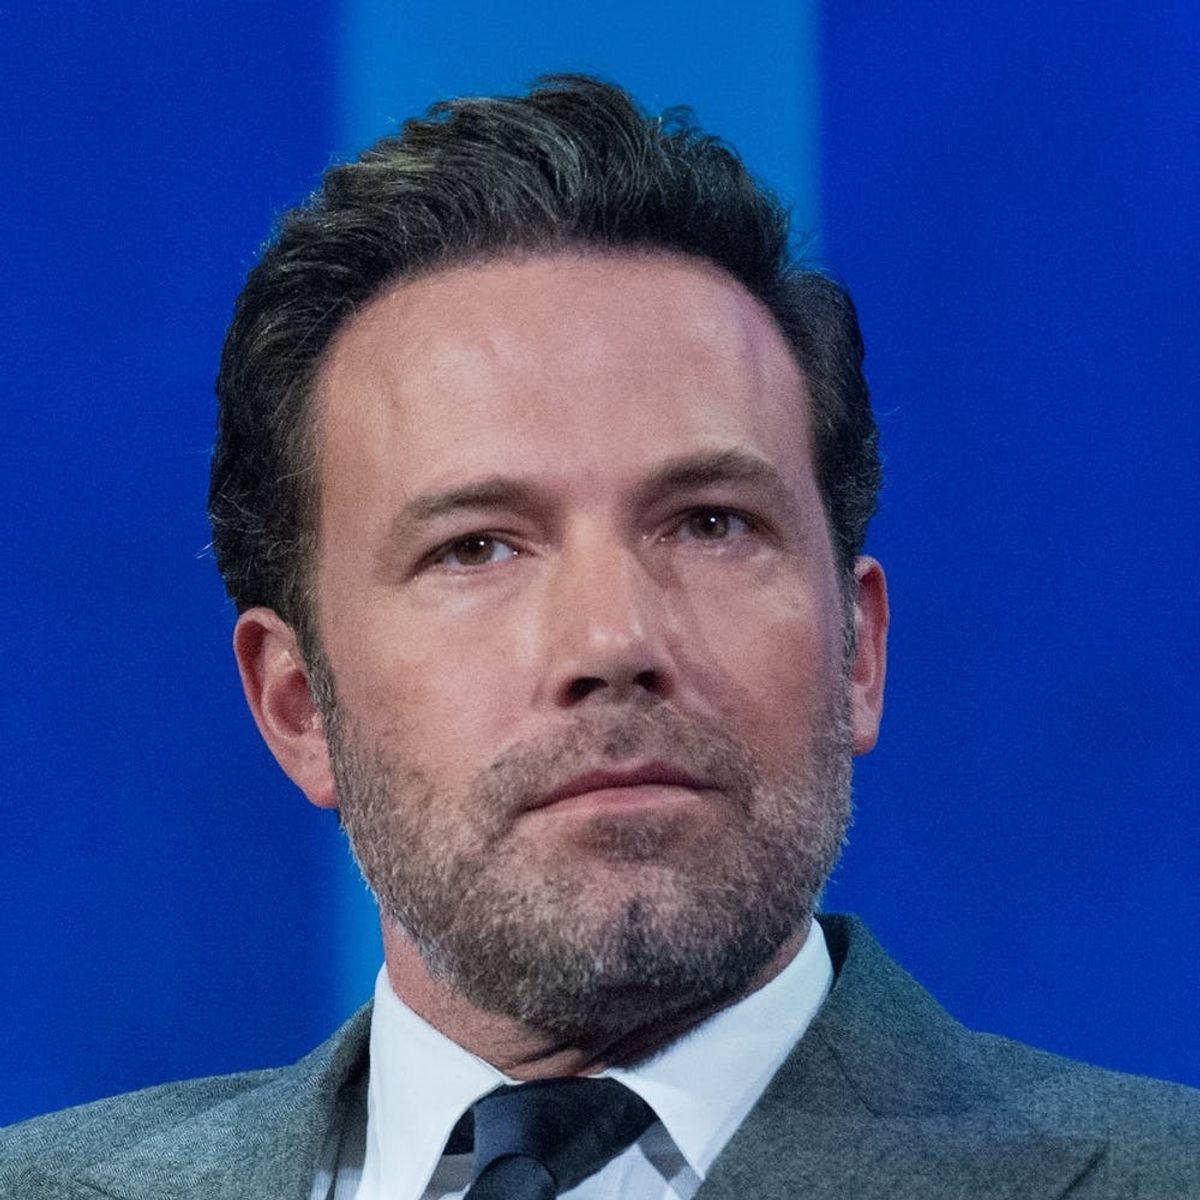 Ben Affleck’s Massive Back Tattoo Is the Real Deal